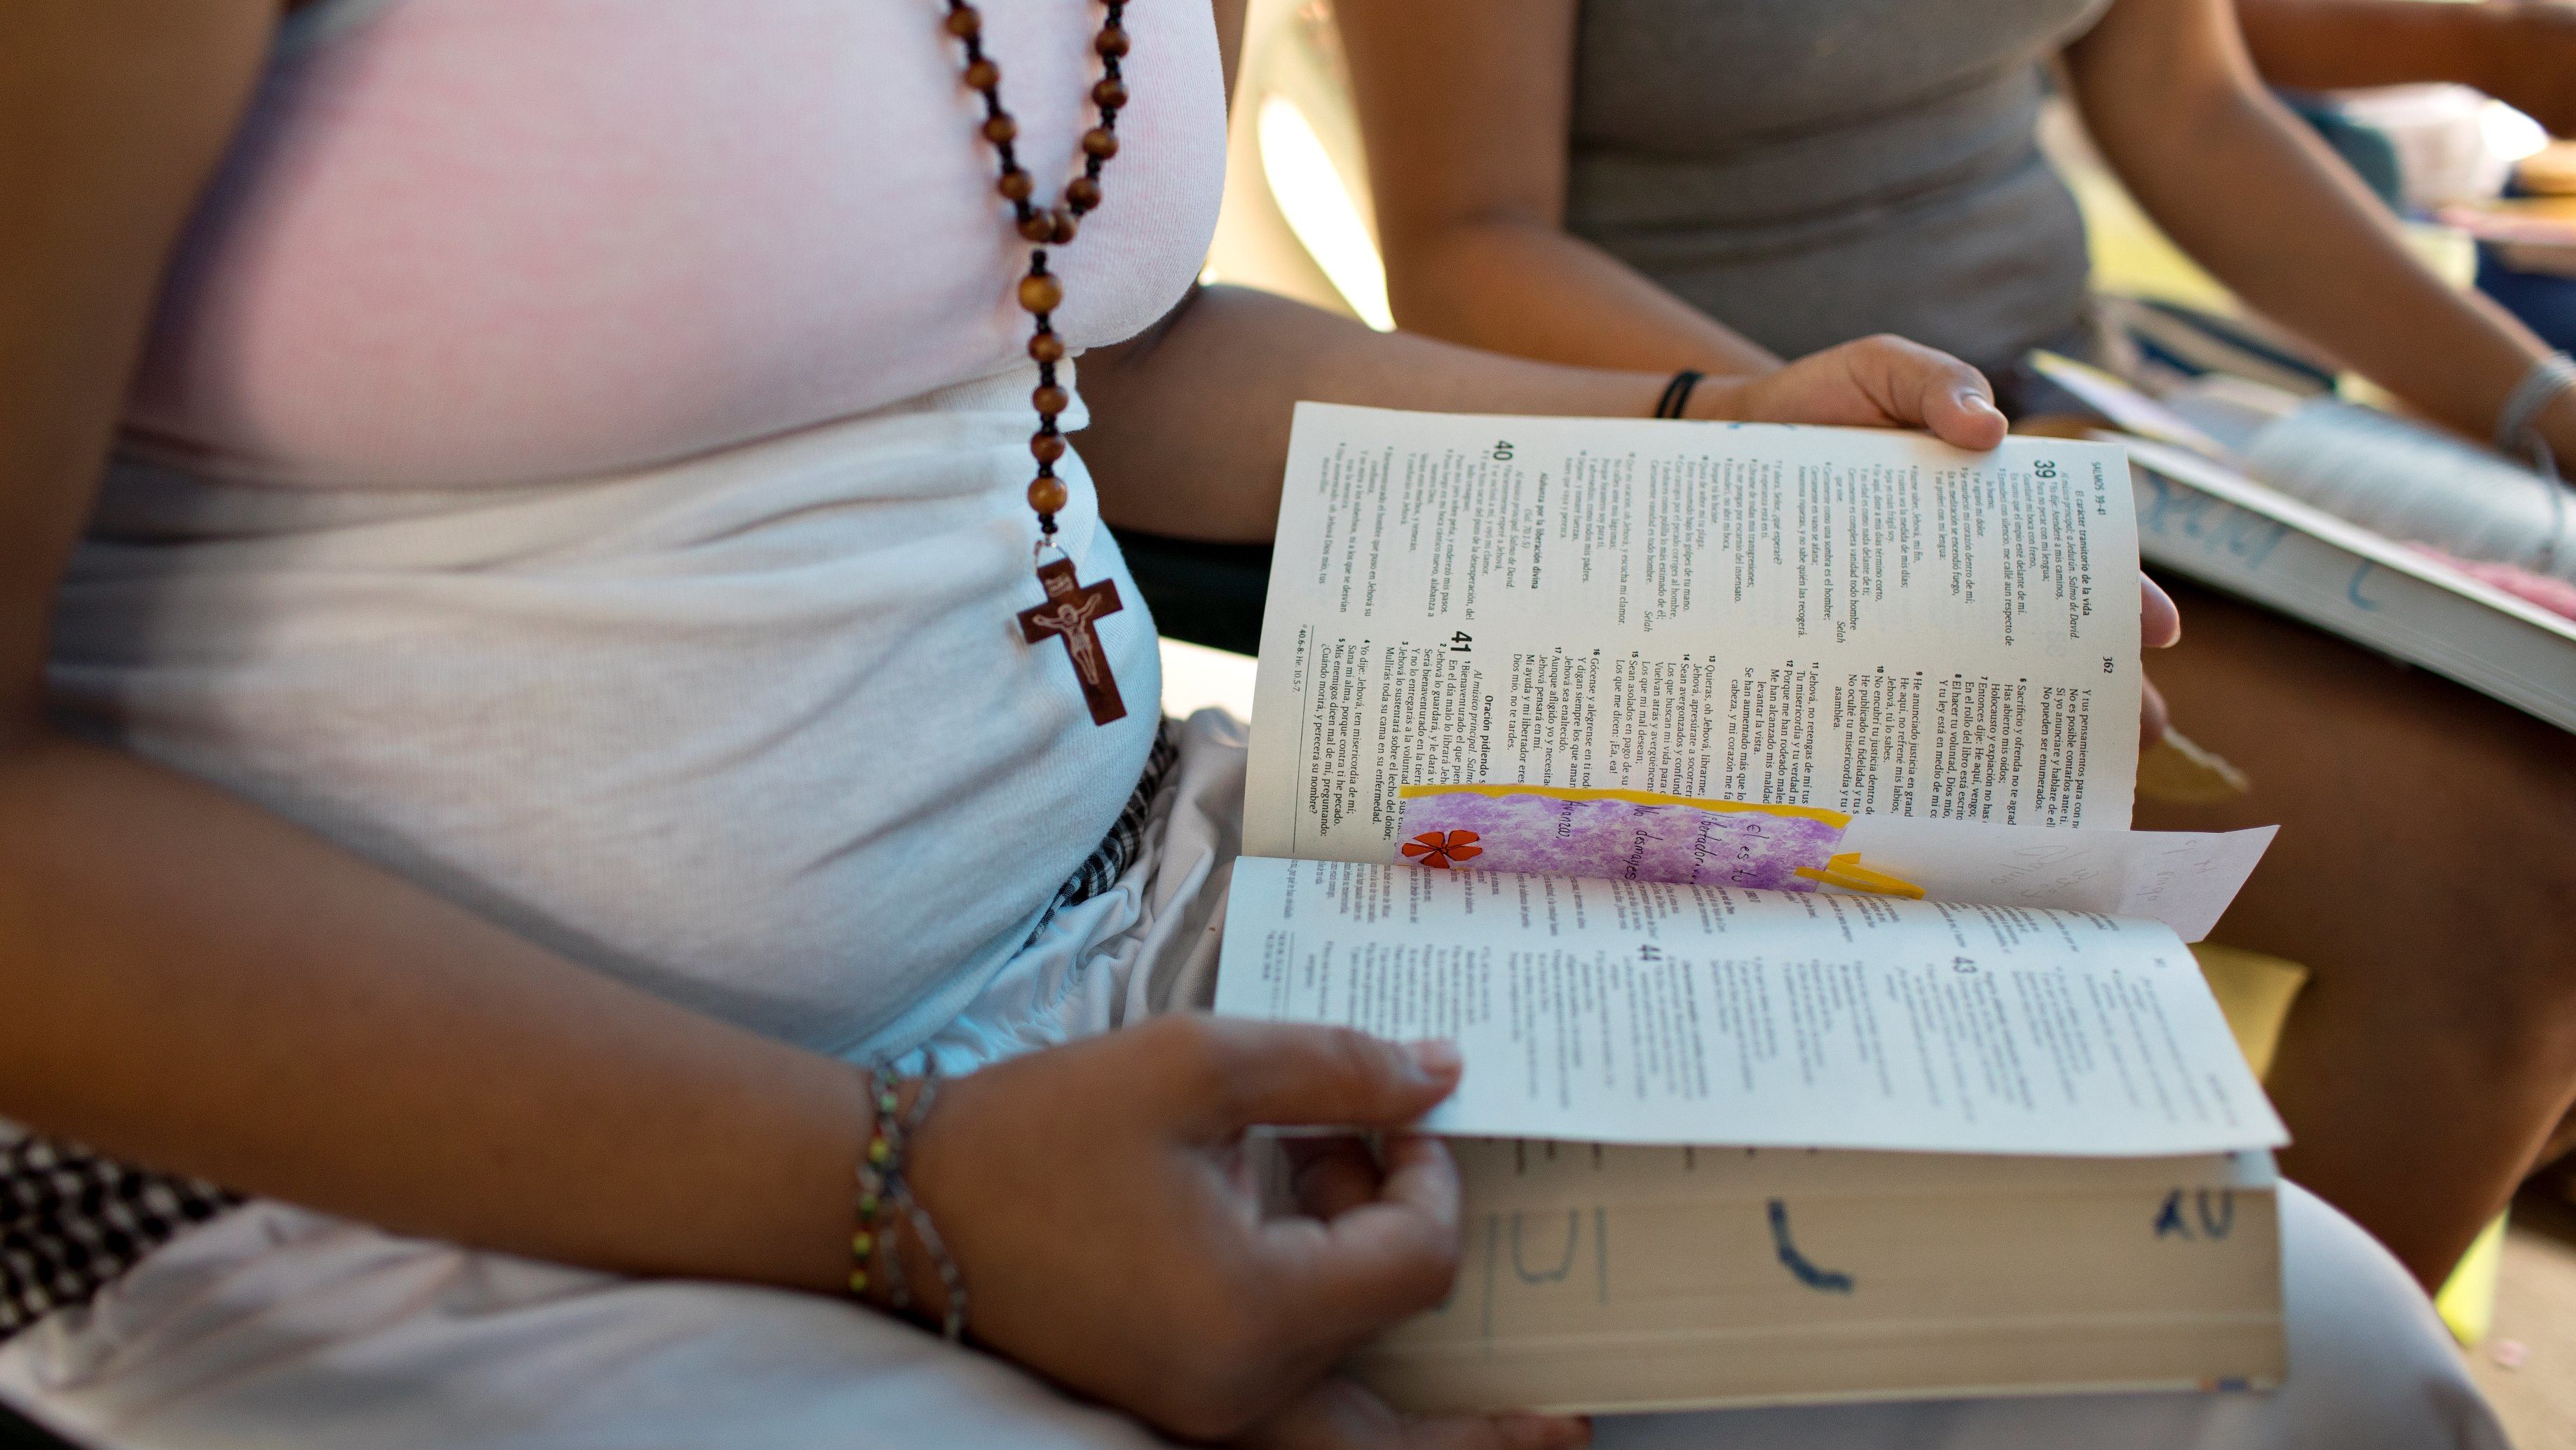 Women read from the Bible at El Salvador's Ilopango prison, which teaches inmates skills such as knitting, piata-making, painting, dancing, aerobics, reading, and cosmetology, among others.